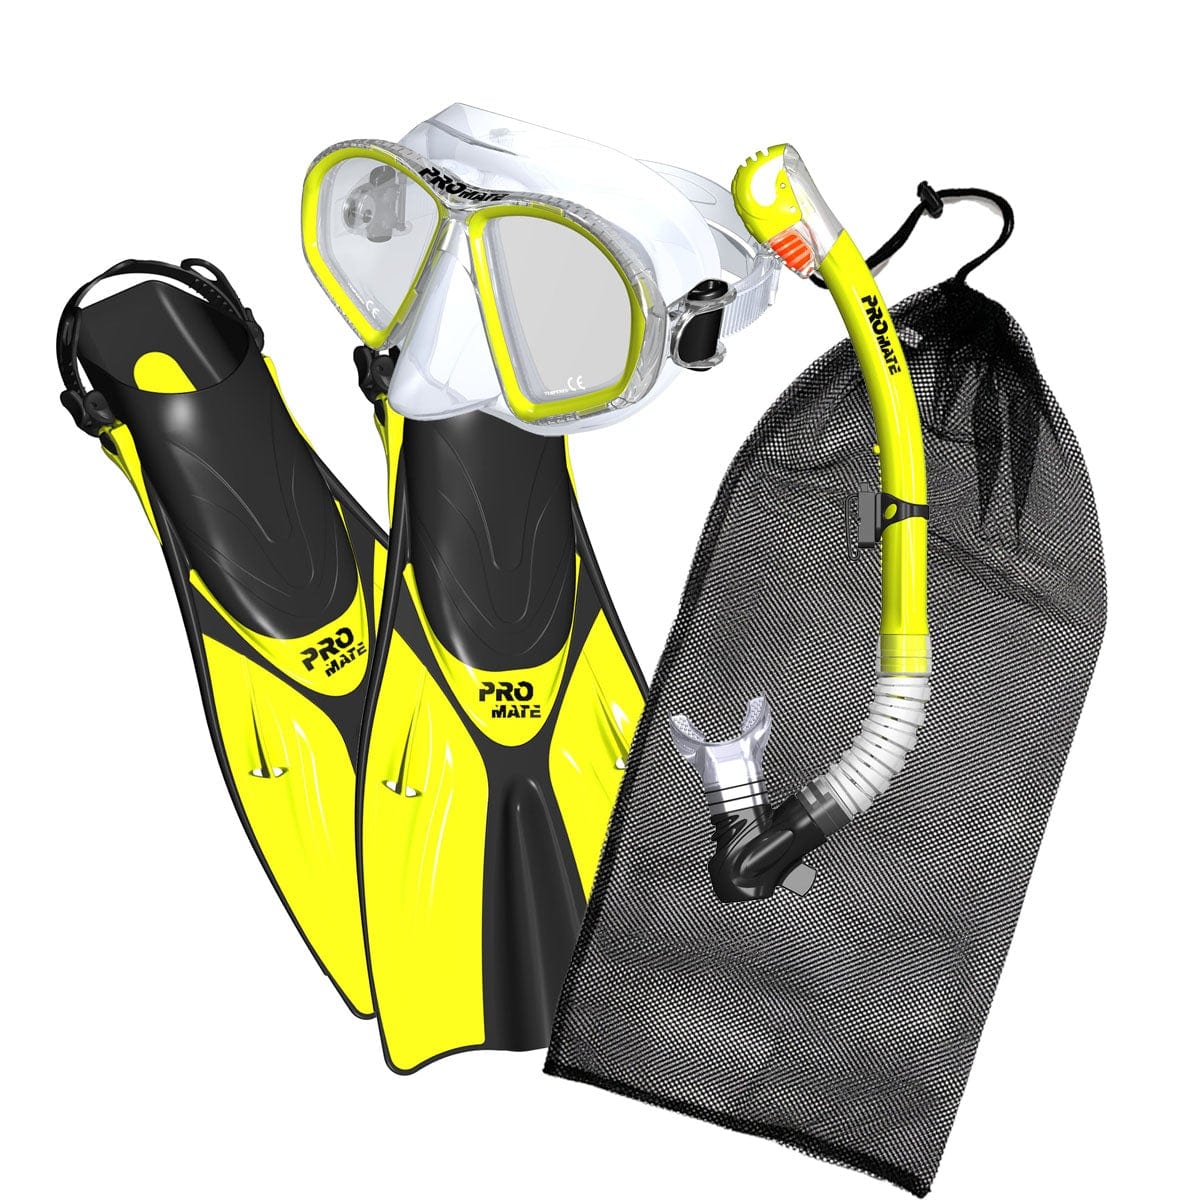 Intime Outdoor Sports Snorkeling Set High-Definition Diving Mask Flexible Adjustable Fins Snorkeling Gear Other L/Xl